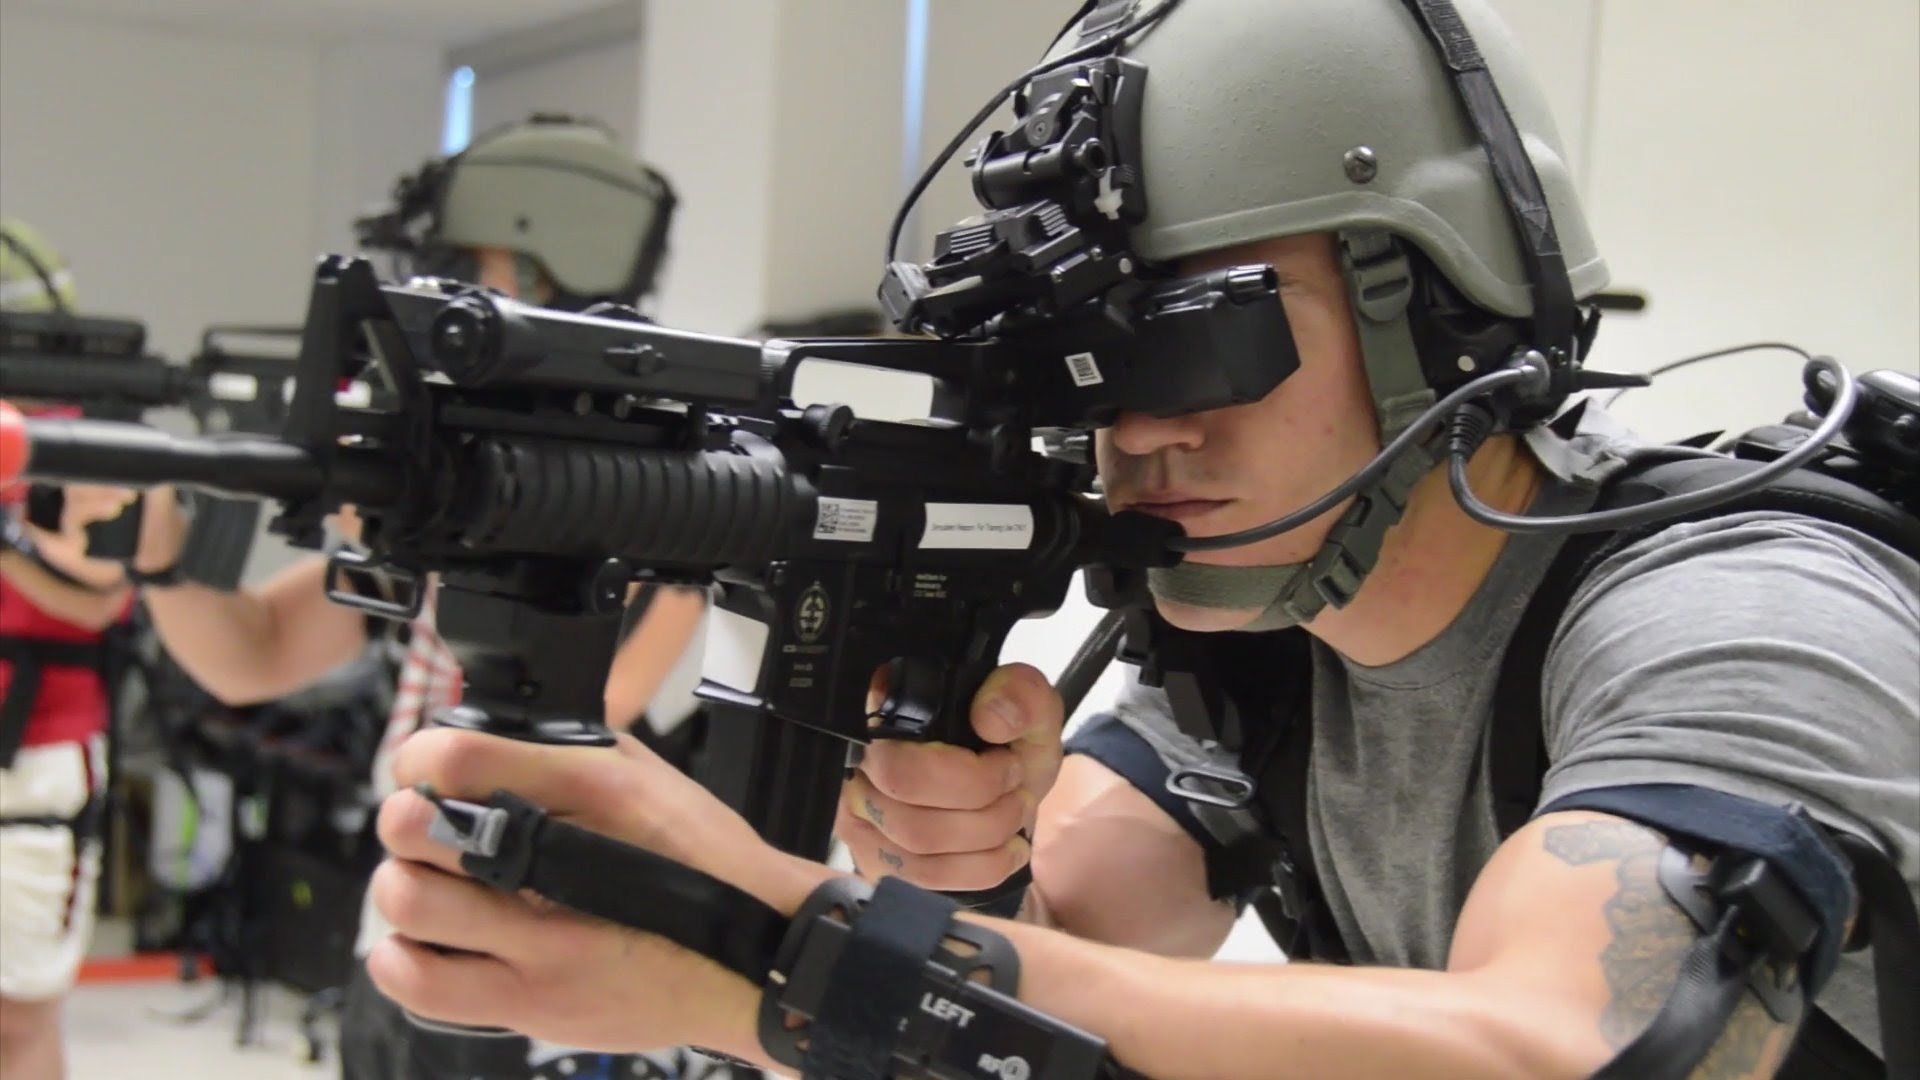 The effectiveness of a virtual reality counter-terrorism training center for cops and firefighters has been put to the test.